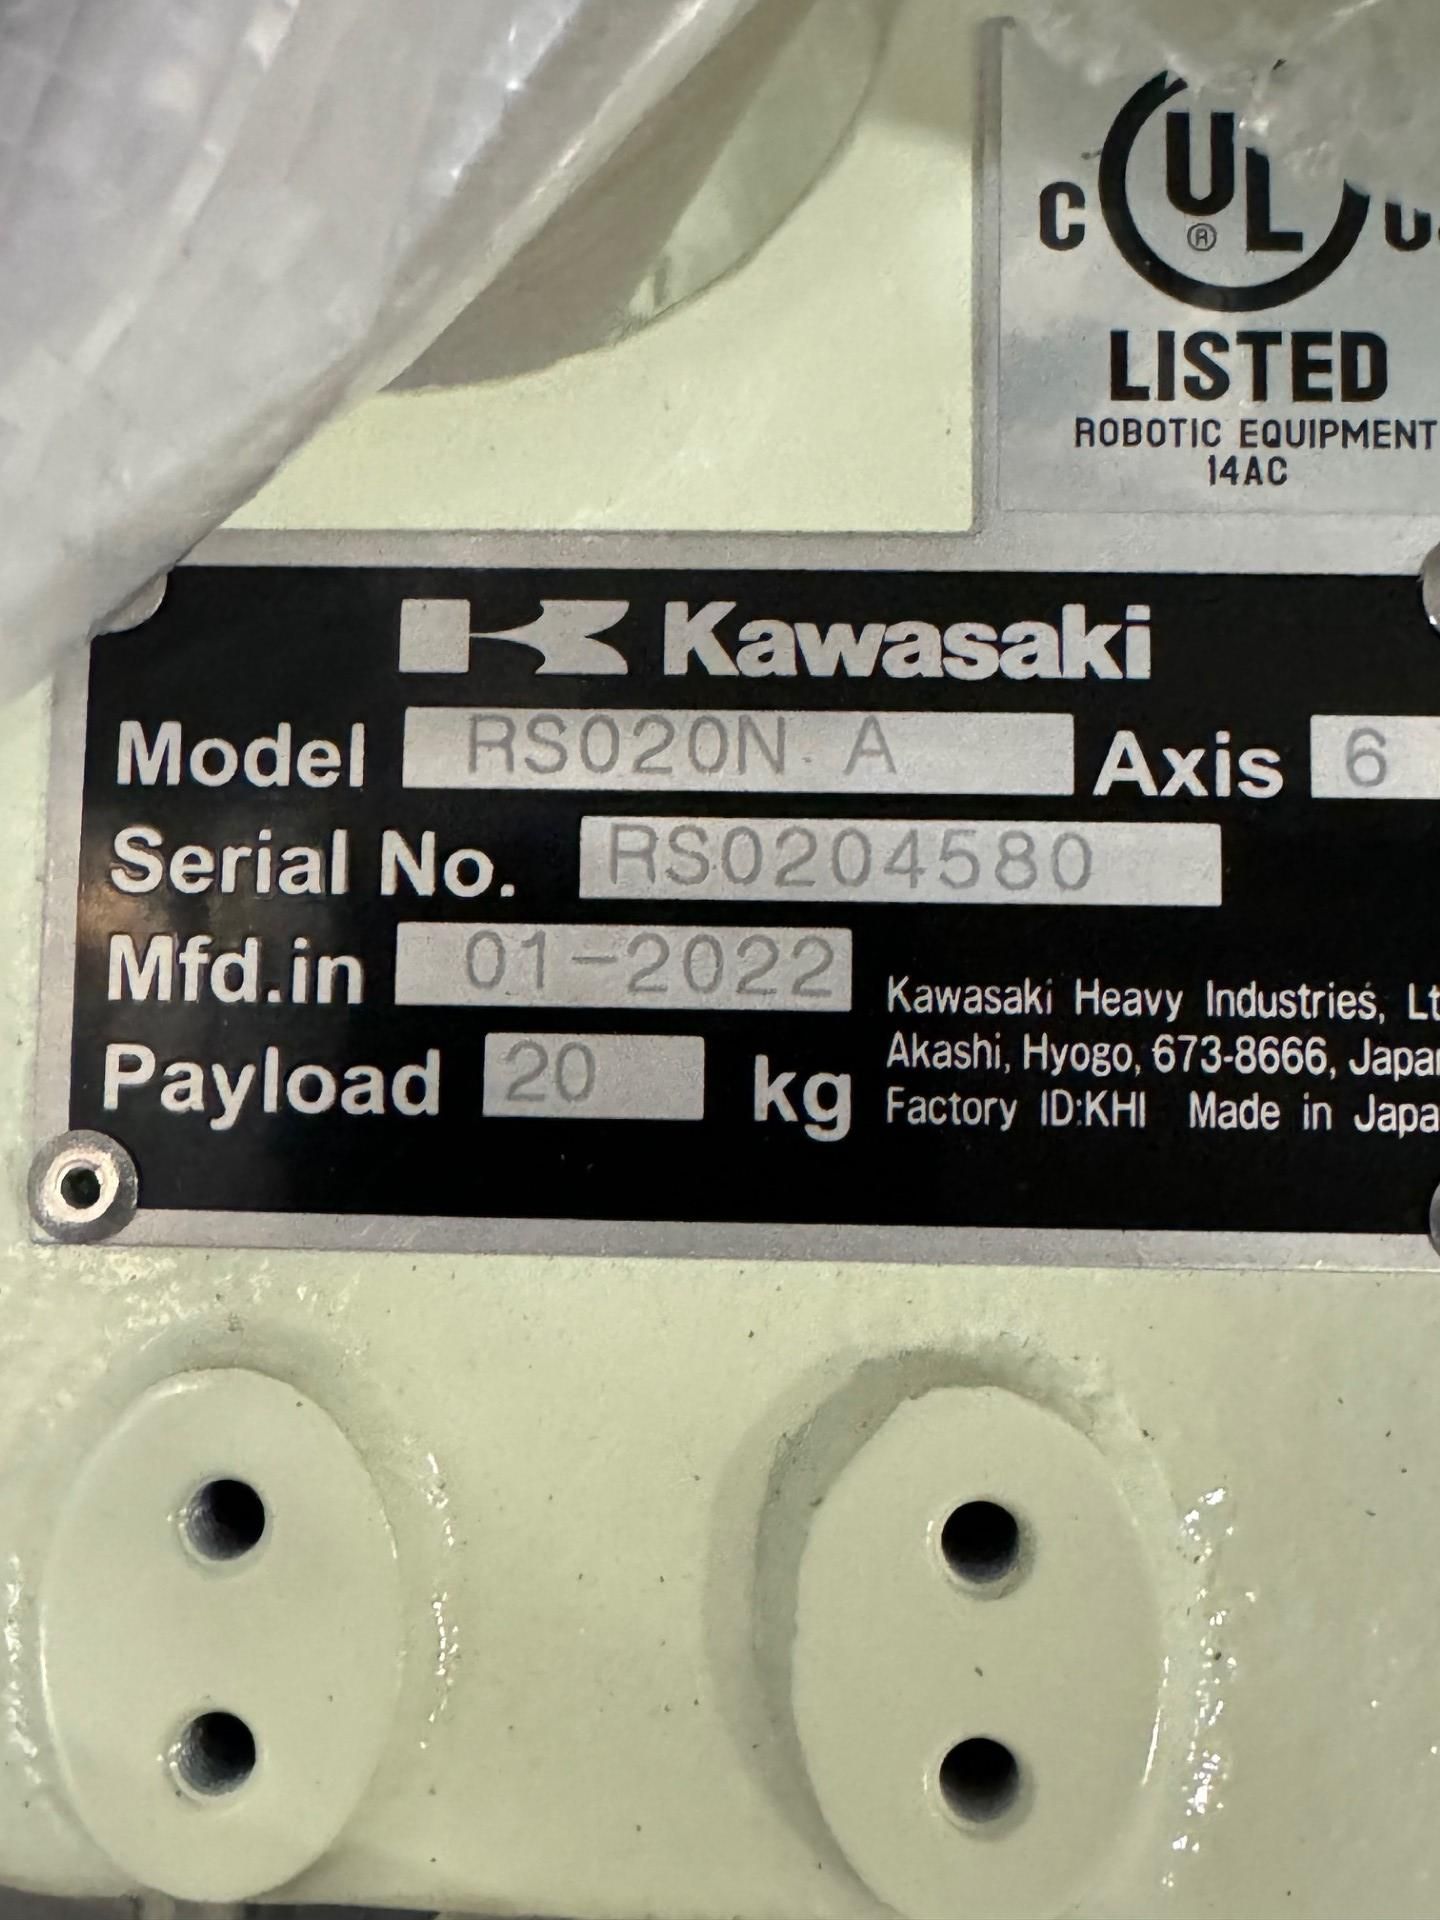 NEW KAWASAKI ROBOT MODEL RS020N, SN 4580, 20KG X 1725MM REACH WITH EO1 CONTROLS, CABLES & TEACH - Image 6 of 7